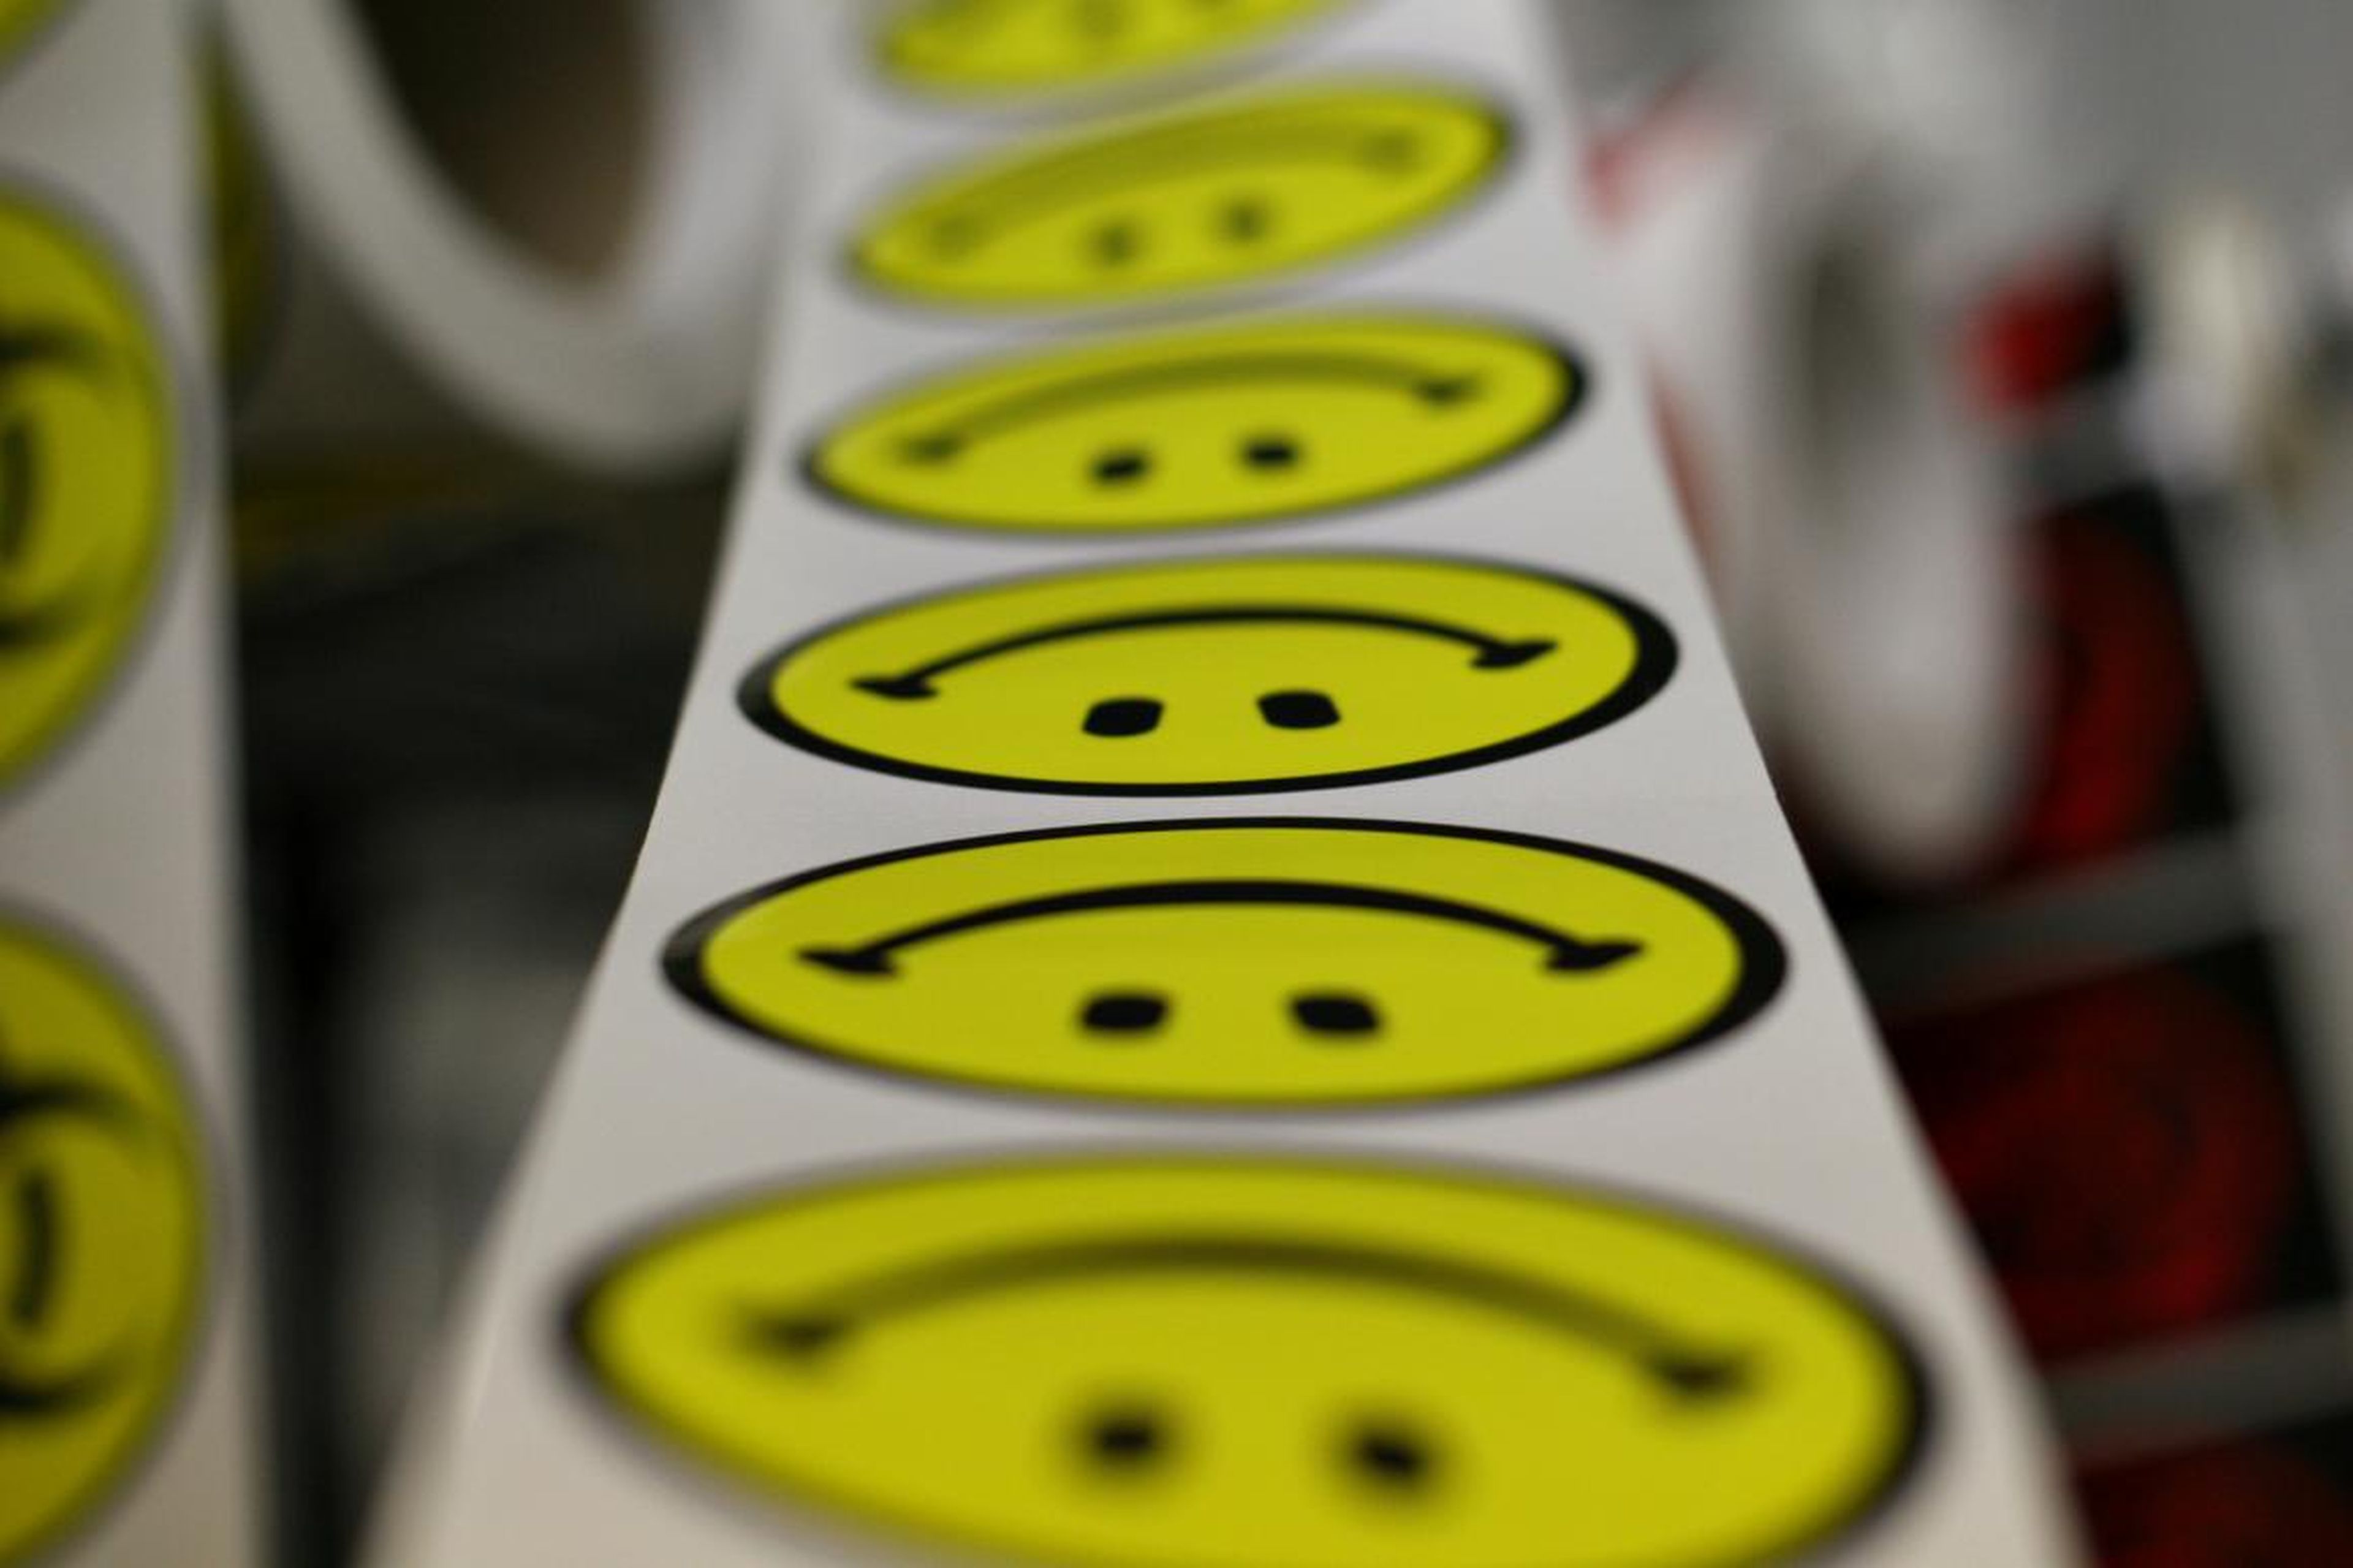 In 1963, Harvey Ball drew a smiley face outlined with a circle and filled with yellow for $45 to liven up buttons and badges. He never trademarked the design, though. Today, SmileyWorld owns the design and makes over $250 million